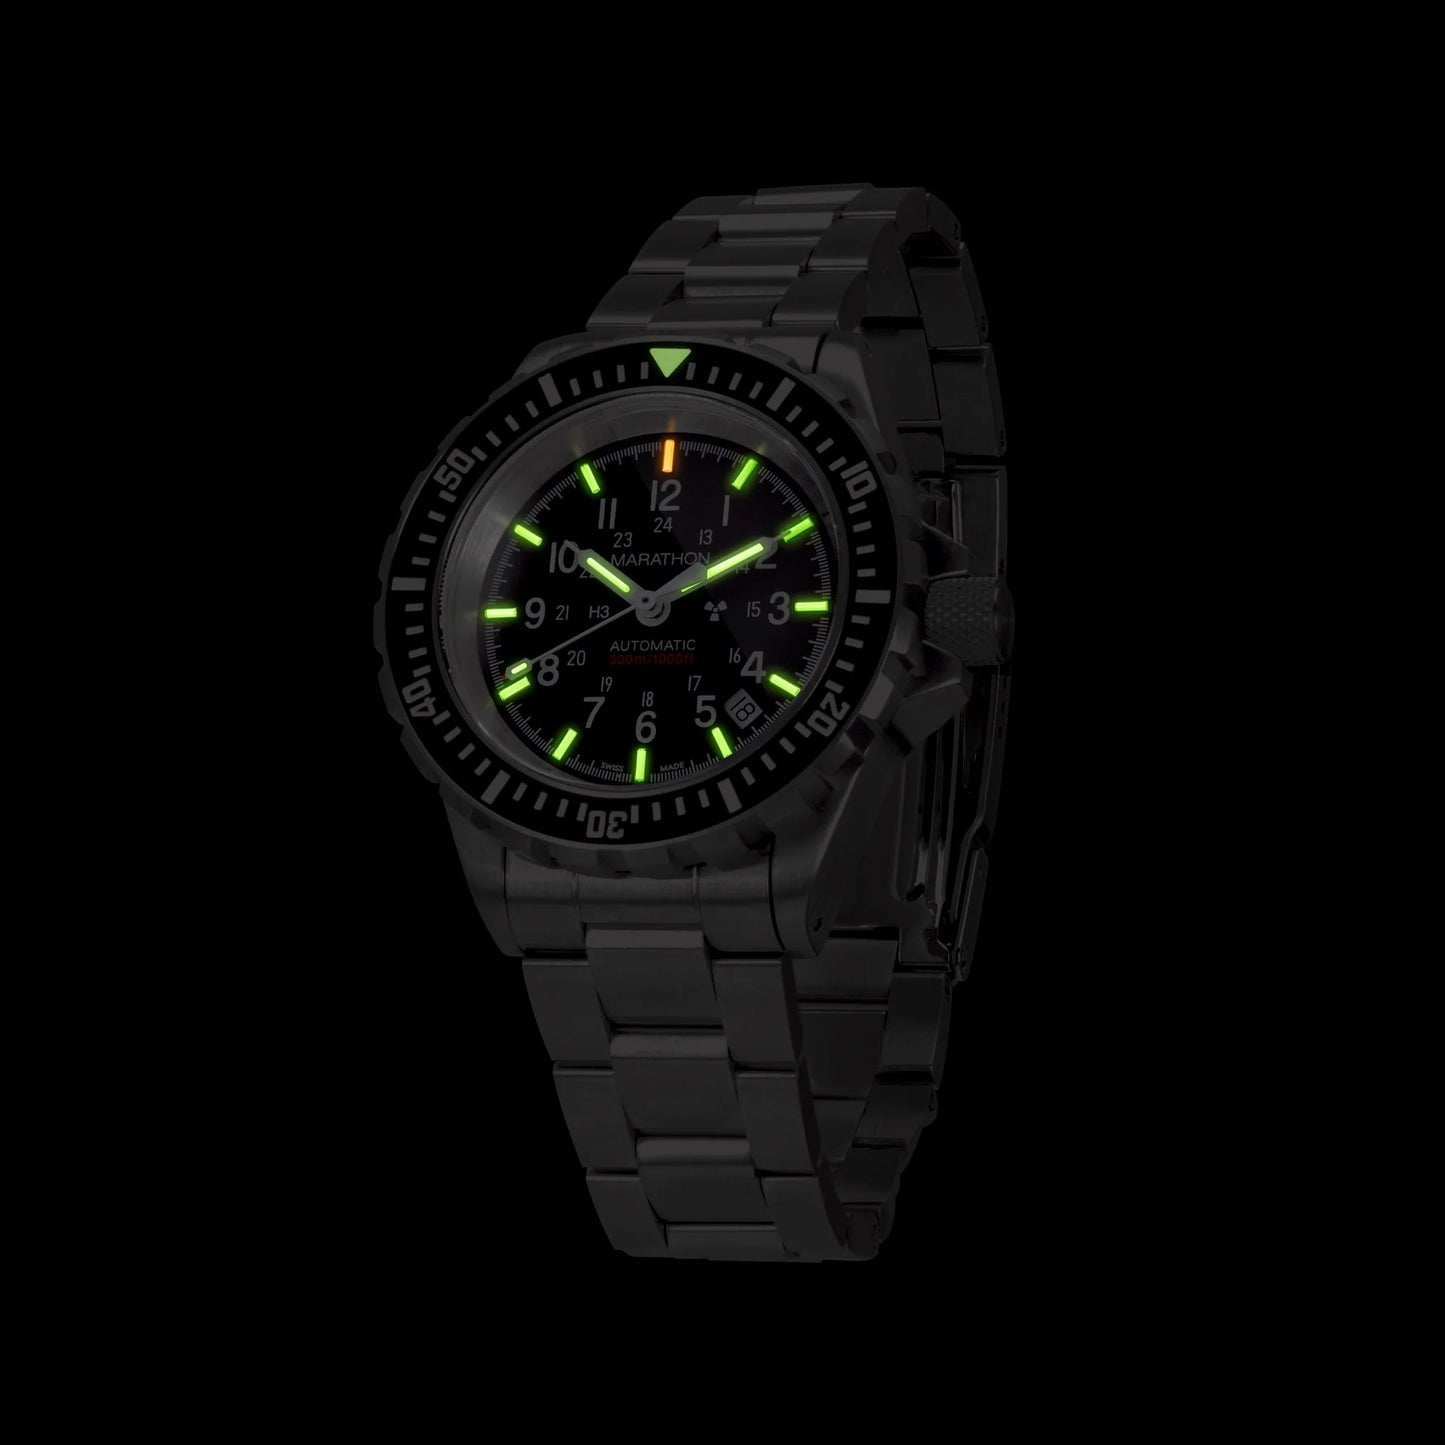 MARATHON 41mm Diver's Automatic (GSAR) with Stainless Steel Bracelet